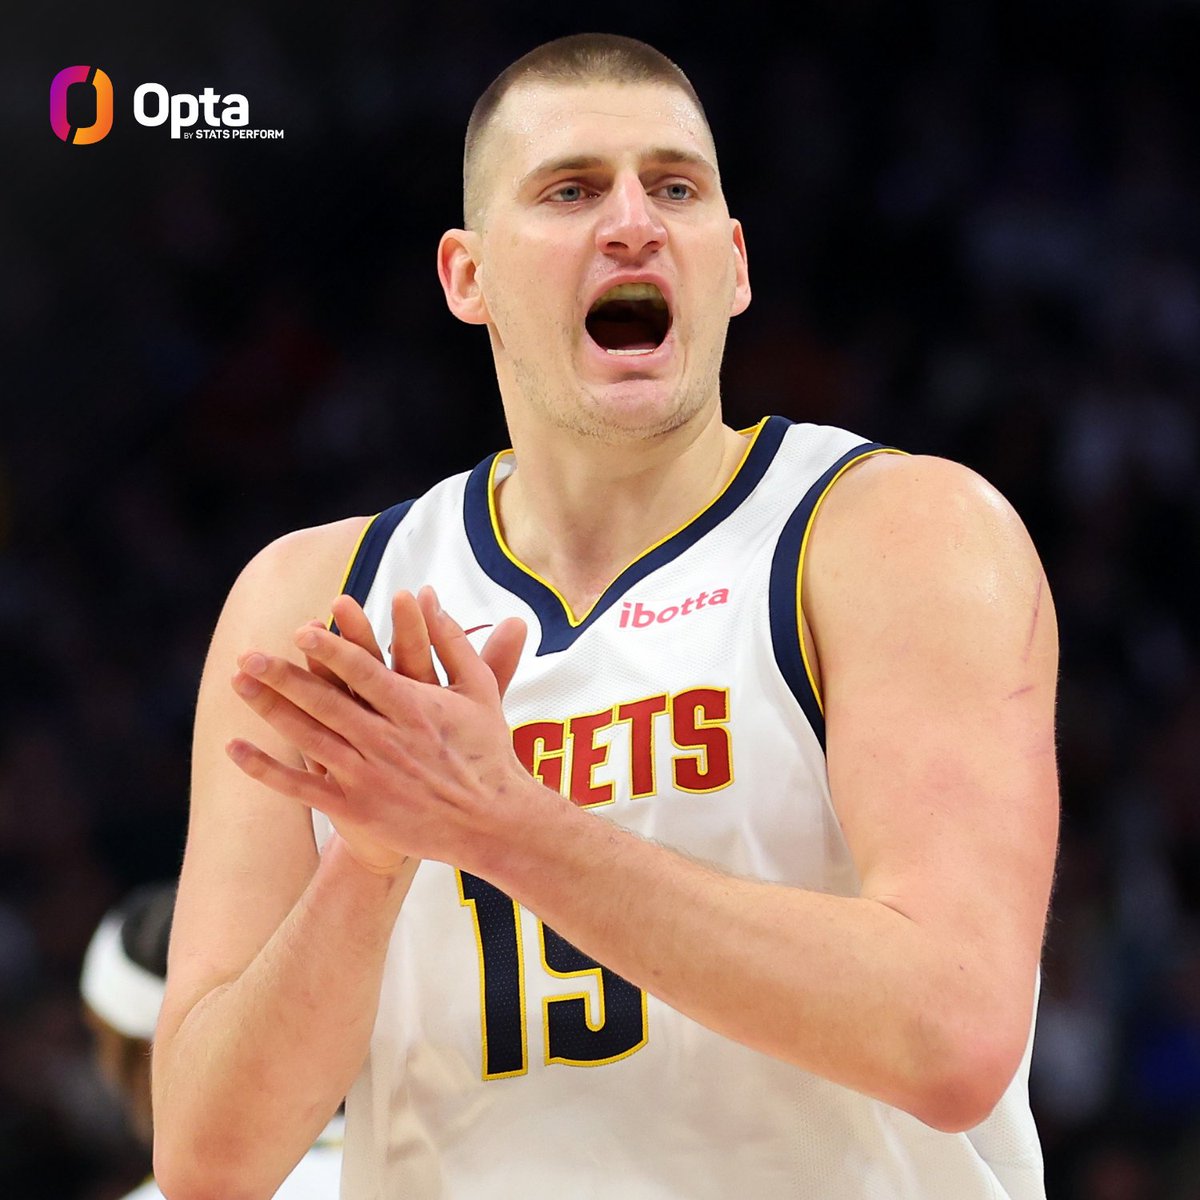 Nikola Jokić of the @nuggets is the second player in NBA history to have at least 80 points, 50 rebounds and 45 assists over a 3-game span. The other was Wilt Chamberlain from March 18-20, 1968.